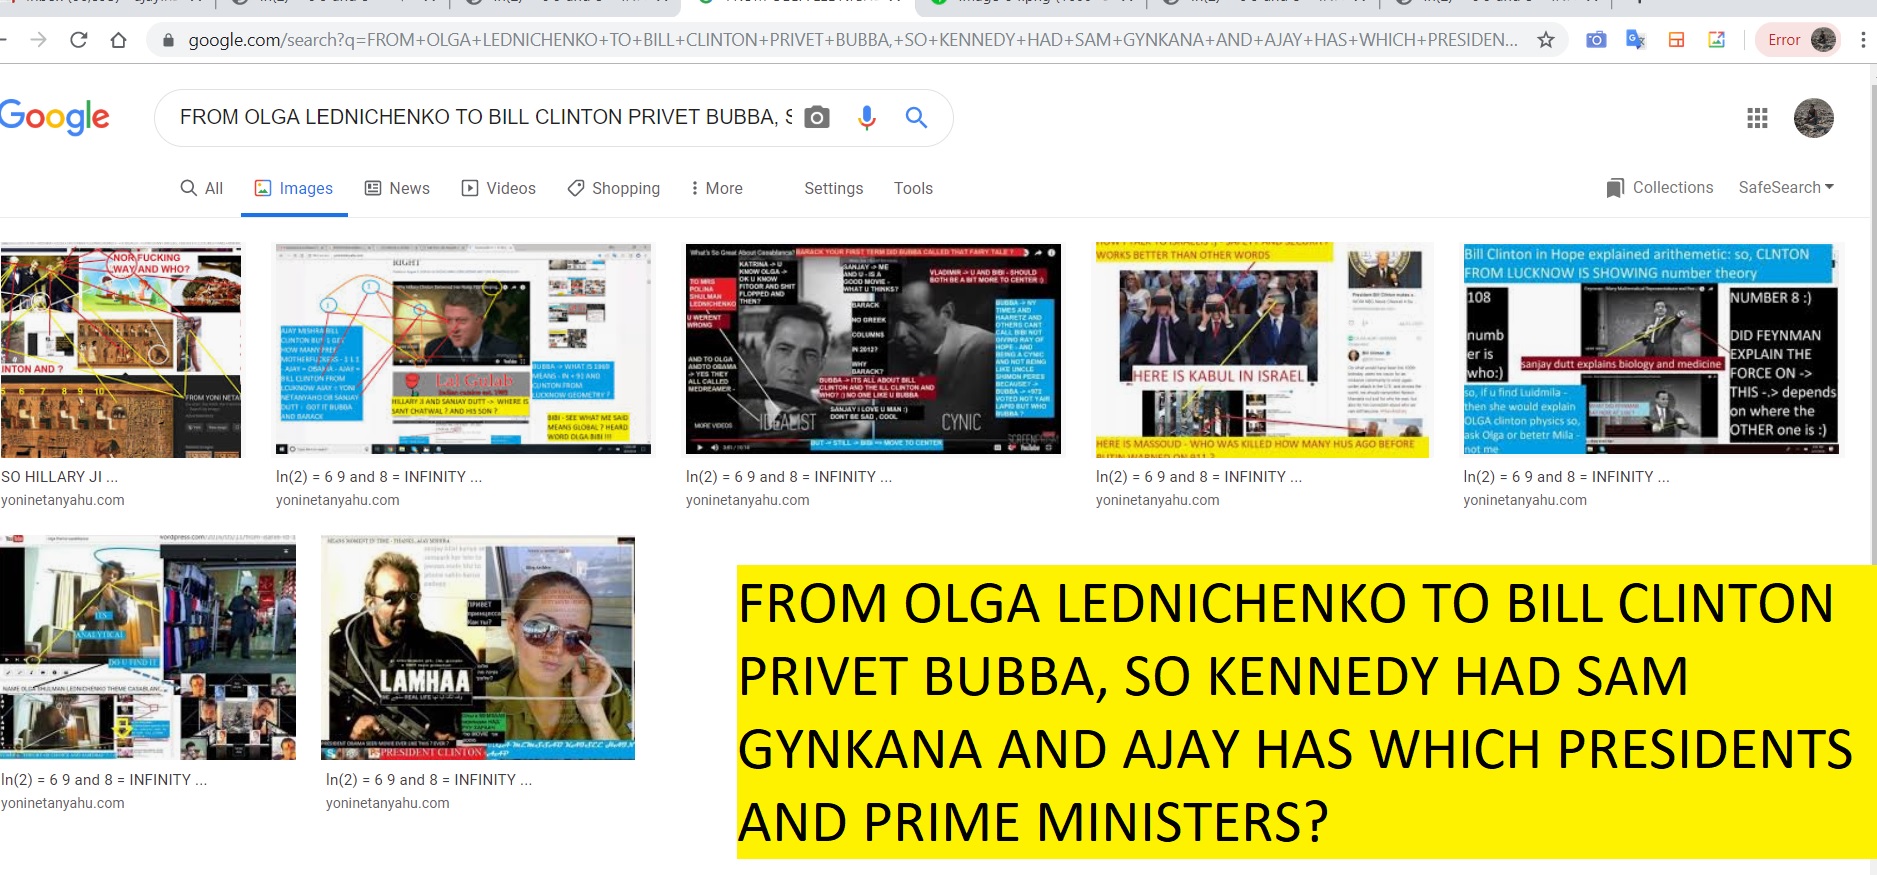 FROM OLGA LEDNICHENKO TO BILL CLINTON PRIVET BUBBA, SO KENNEDY HAD SAM GYNKANA AND AJAY HAS WHICH PRESIDENTS AND PRIME MINISTERS